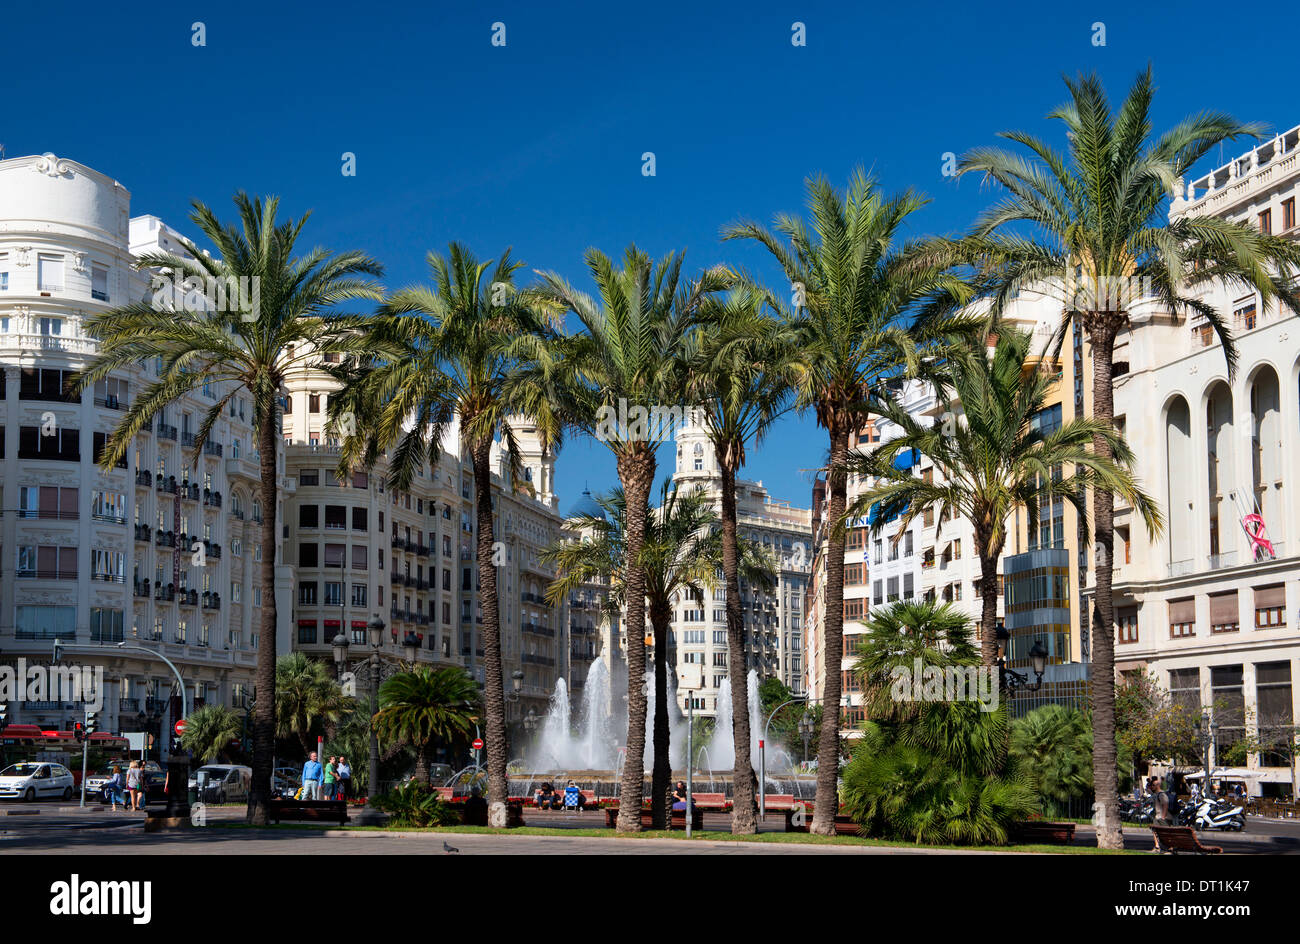 Palm trees, high rise buildings and a fountain in Plaza del Ayuntamiento in Valencia, Valenciana, Spain, Europe Stock Photo